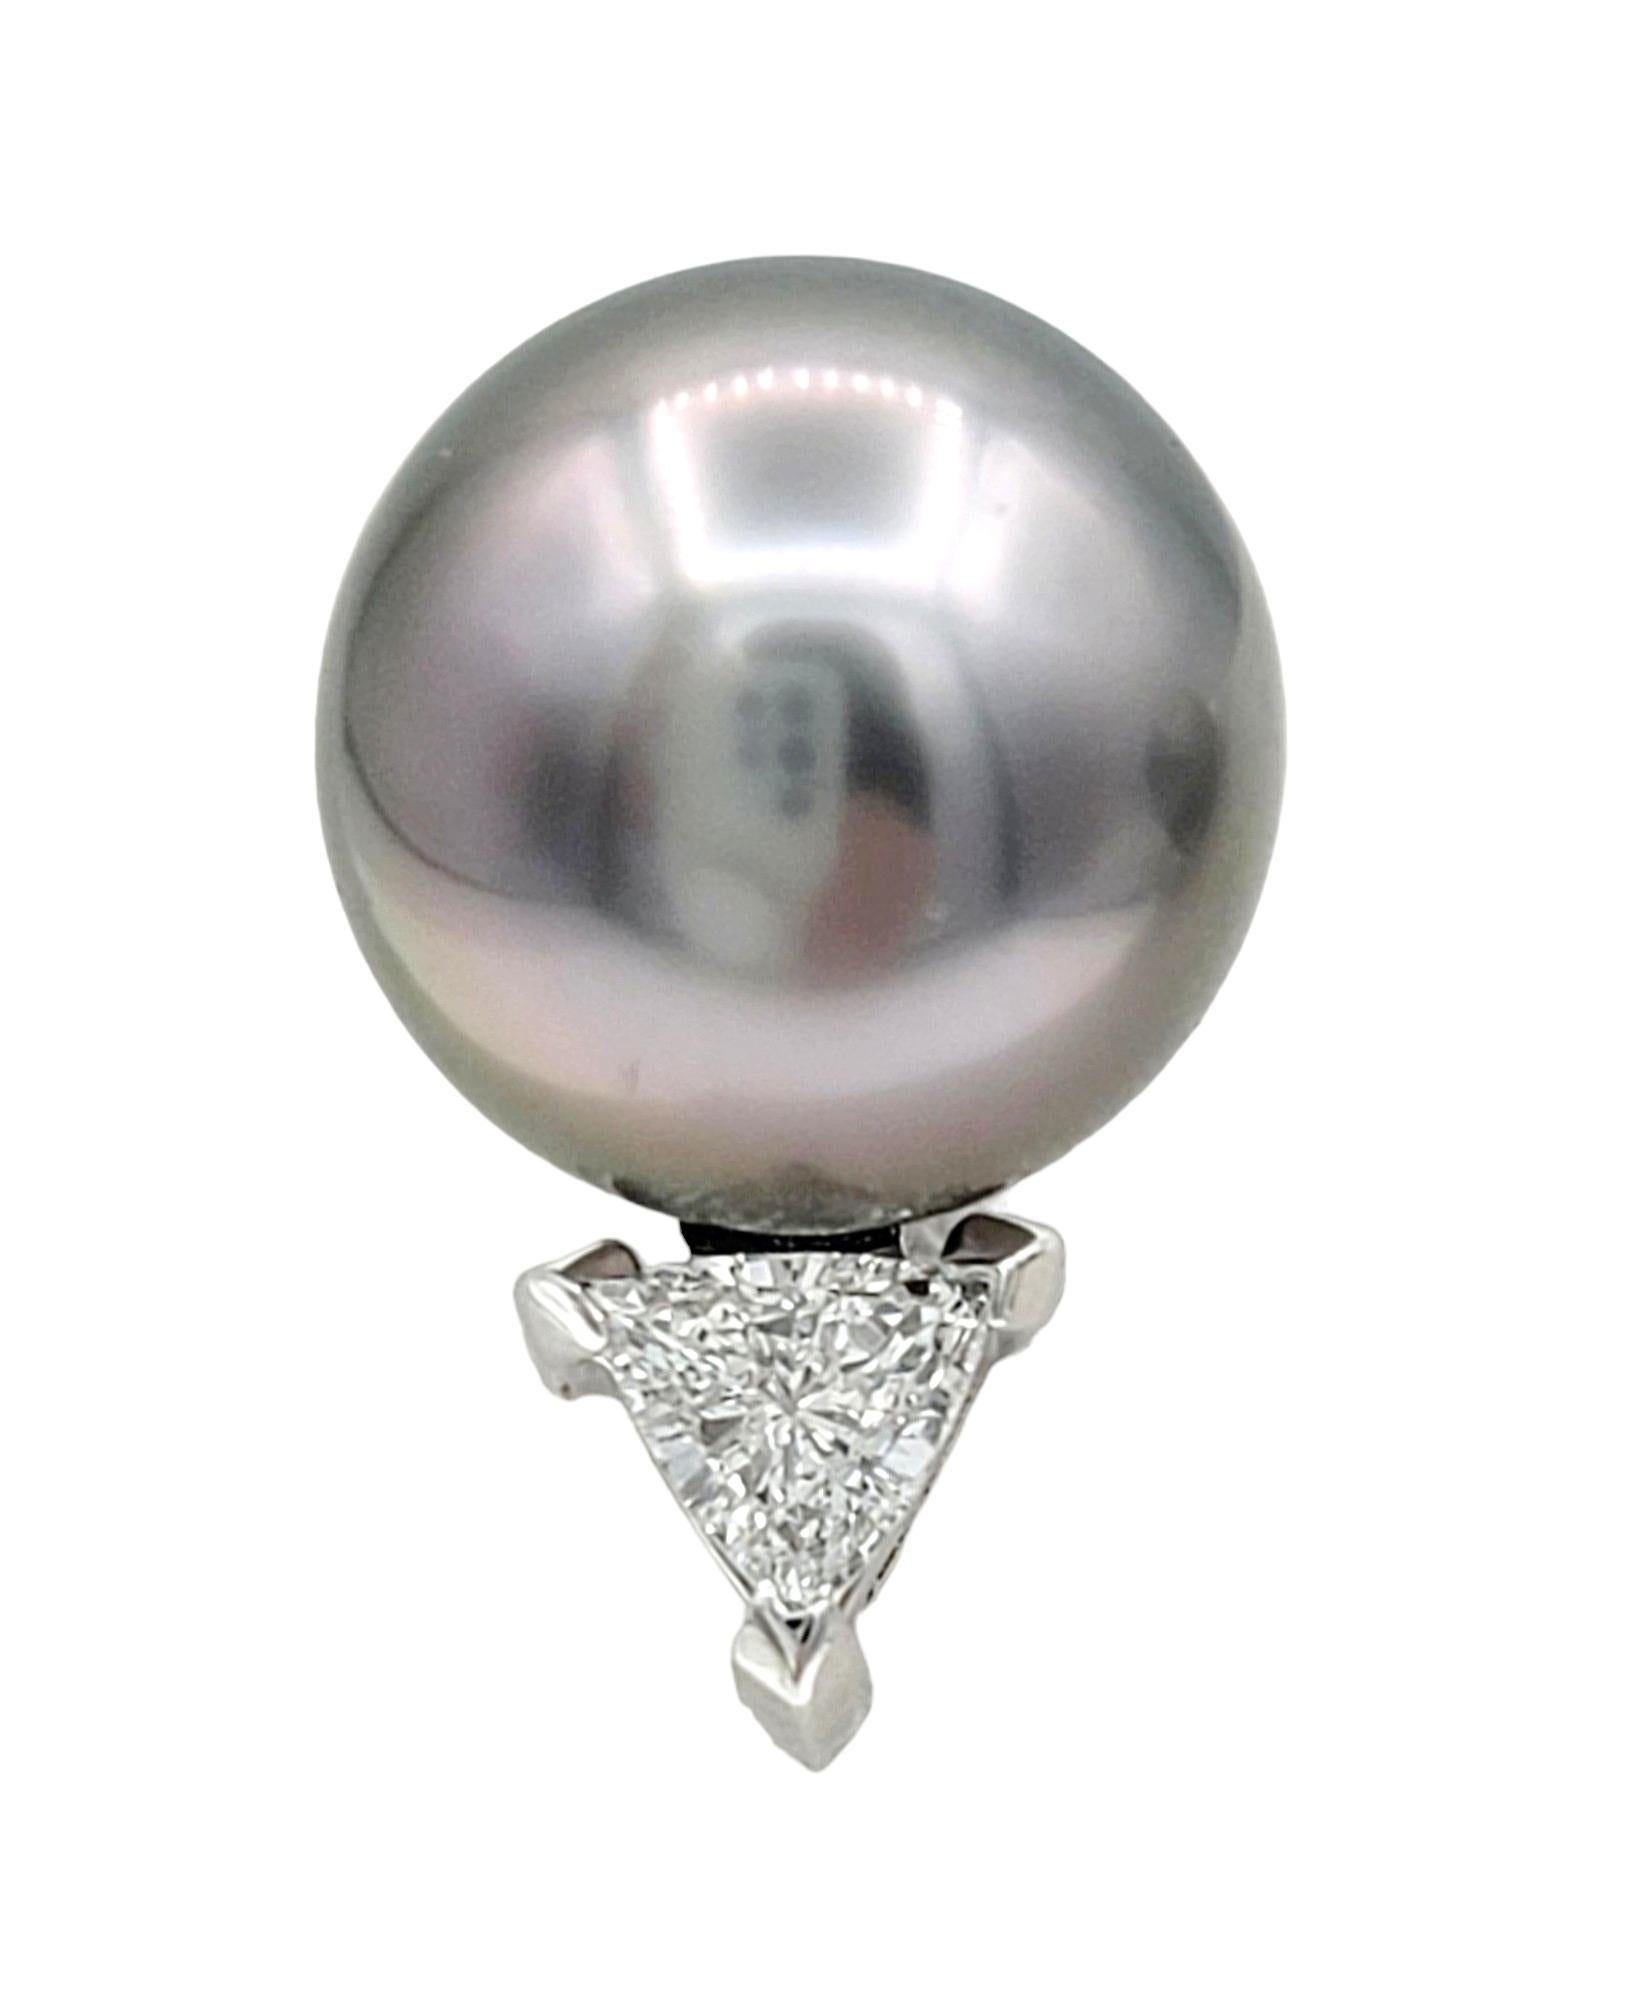 These stud earrings, set in elegant 18 karat white gold, showcase a sophisticated and contrasting design. The focal point of each earring is a lustrous black Tahitian pearl, known for its unique and captivating dark hue. Accompanying each pearl is a